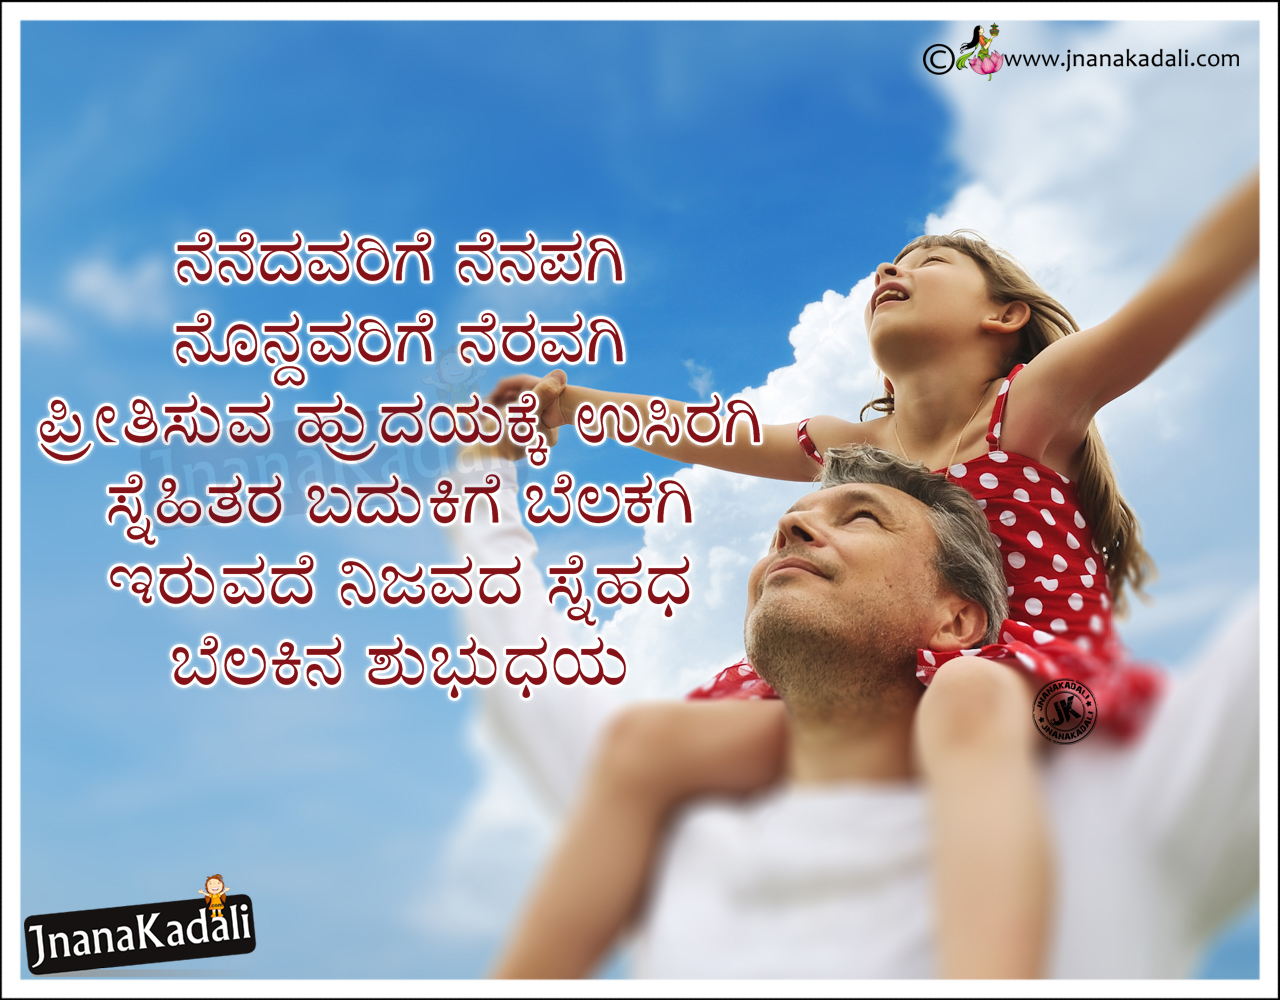 Father and Daughter loving quotes in kannda kannada hd wallpapers with quotes kannada quotes about father father and daughter hd wallpapers free